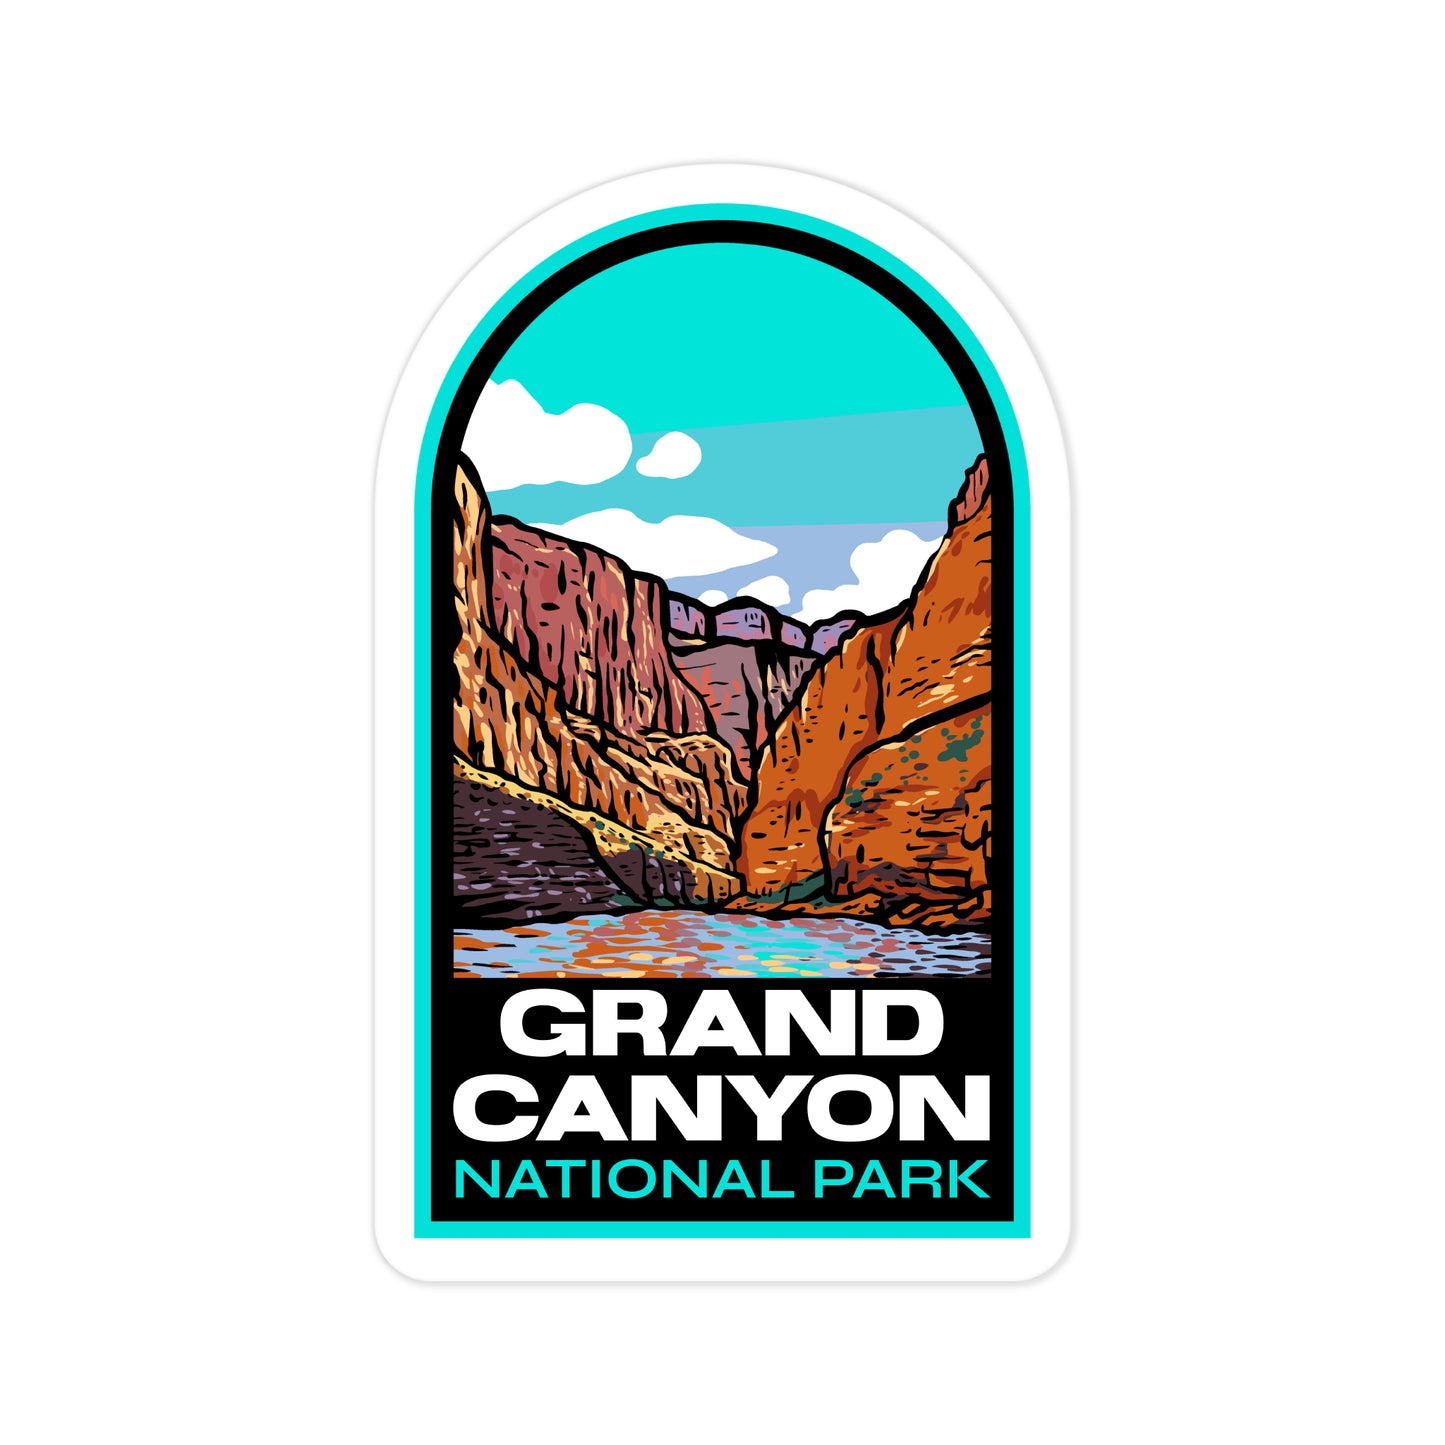 A sticker of Grand Canyon National Park